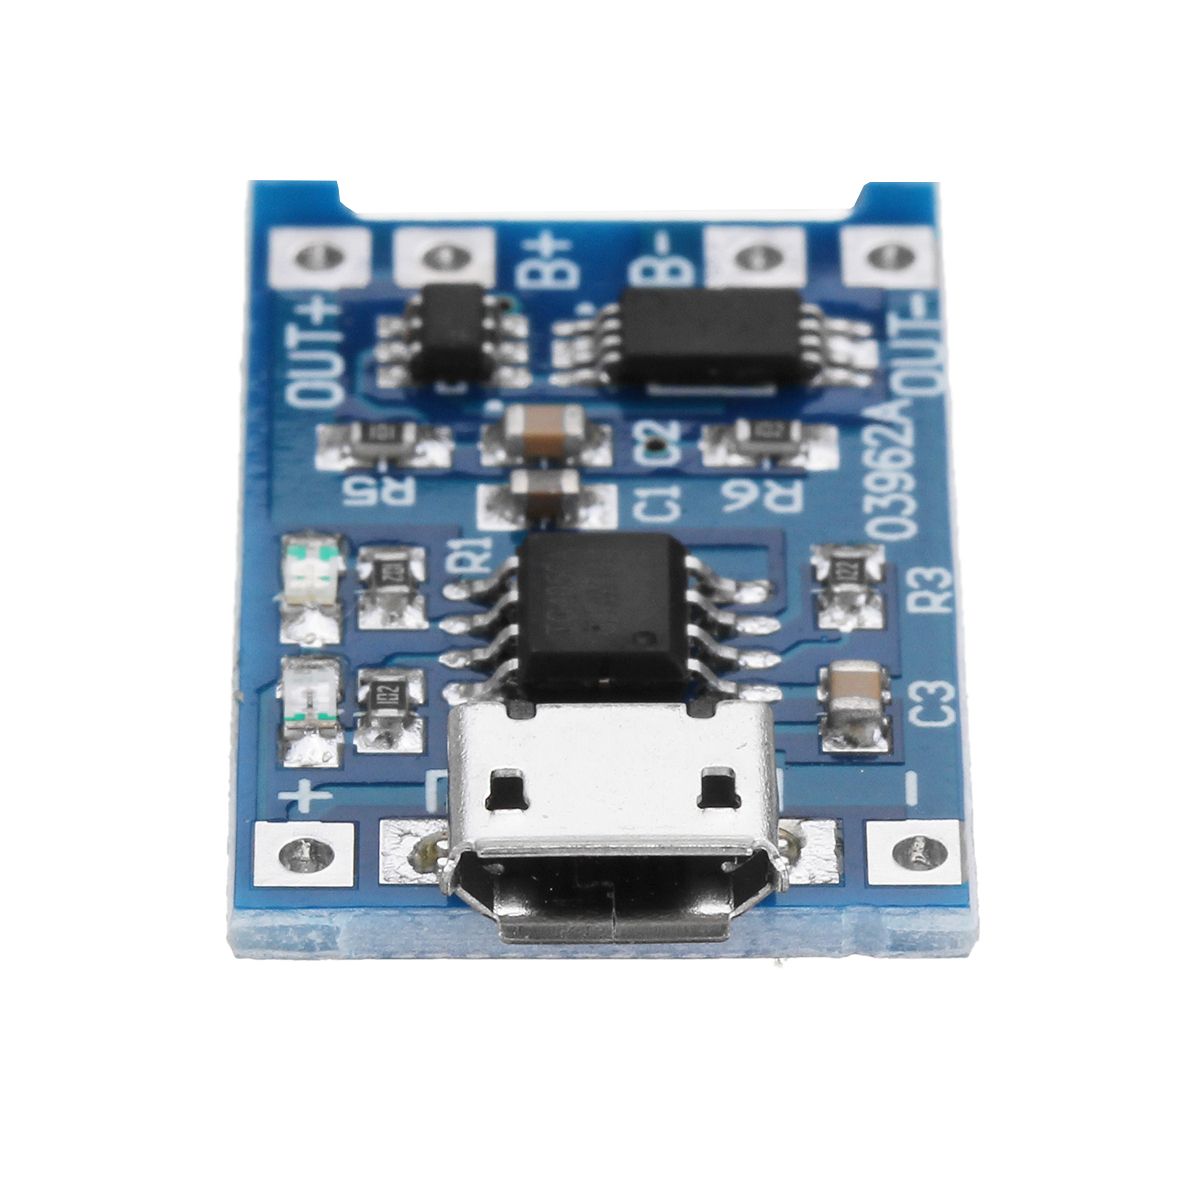 5Pcs-TP4056-Micro-USB-5V-1A-Lithium-Battery-Charging-Protection-Board-TE585-Lipo-Charger-Module-1255762